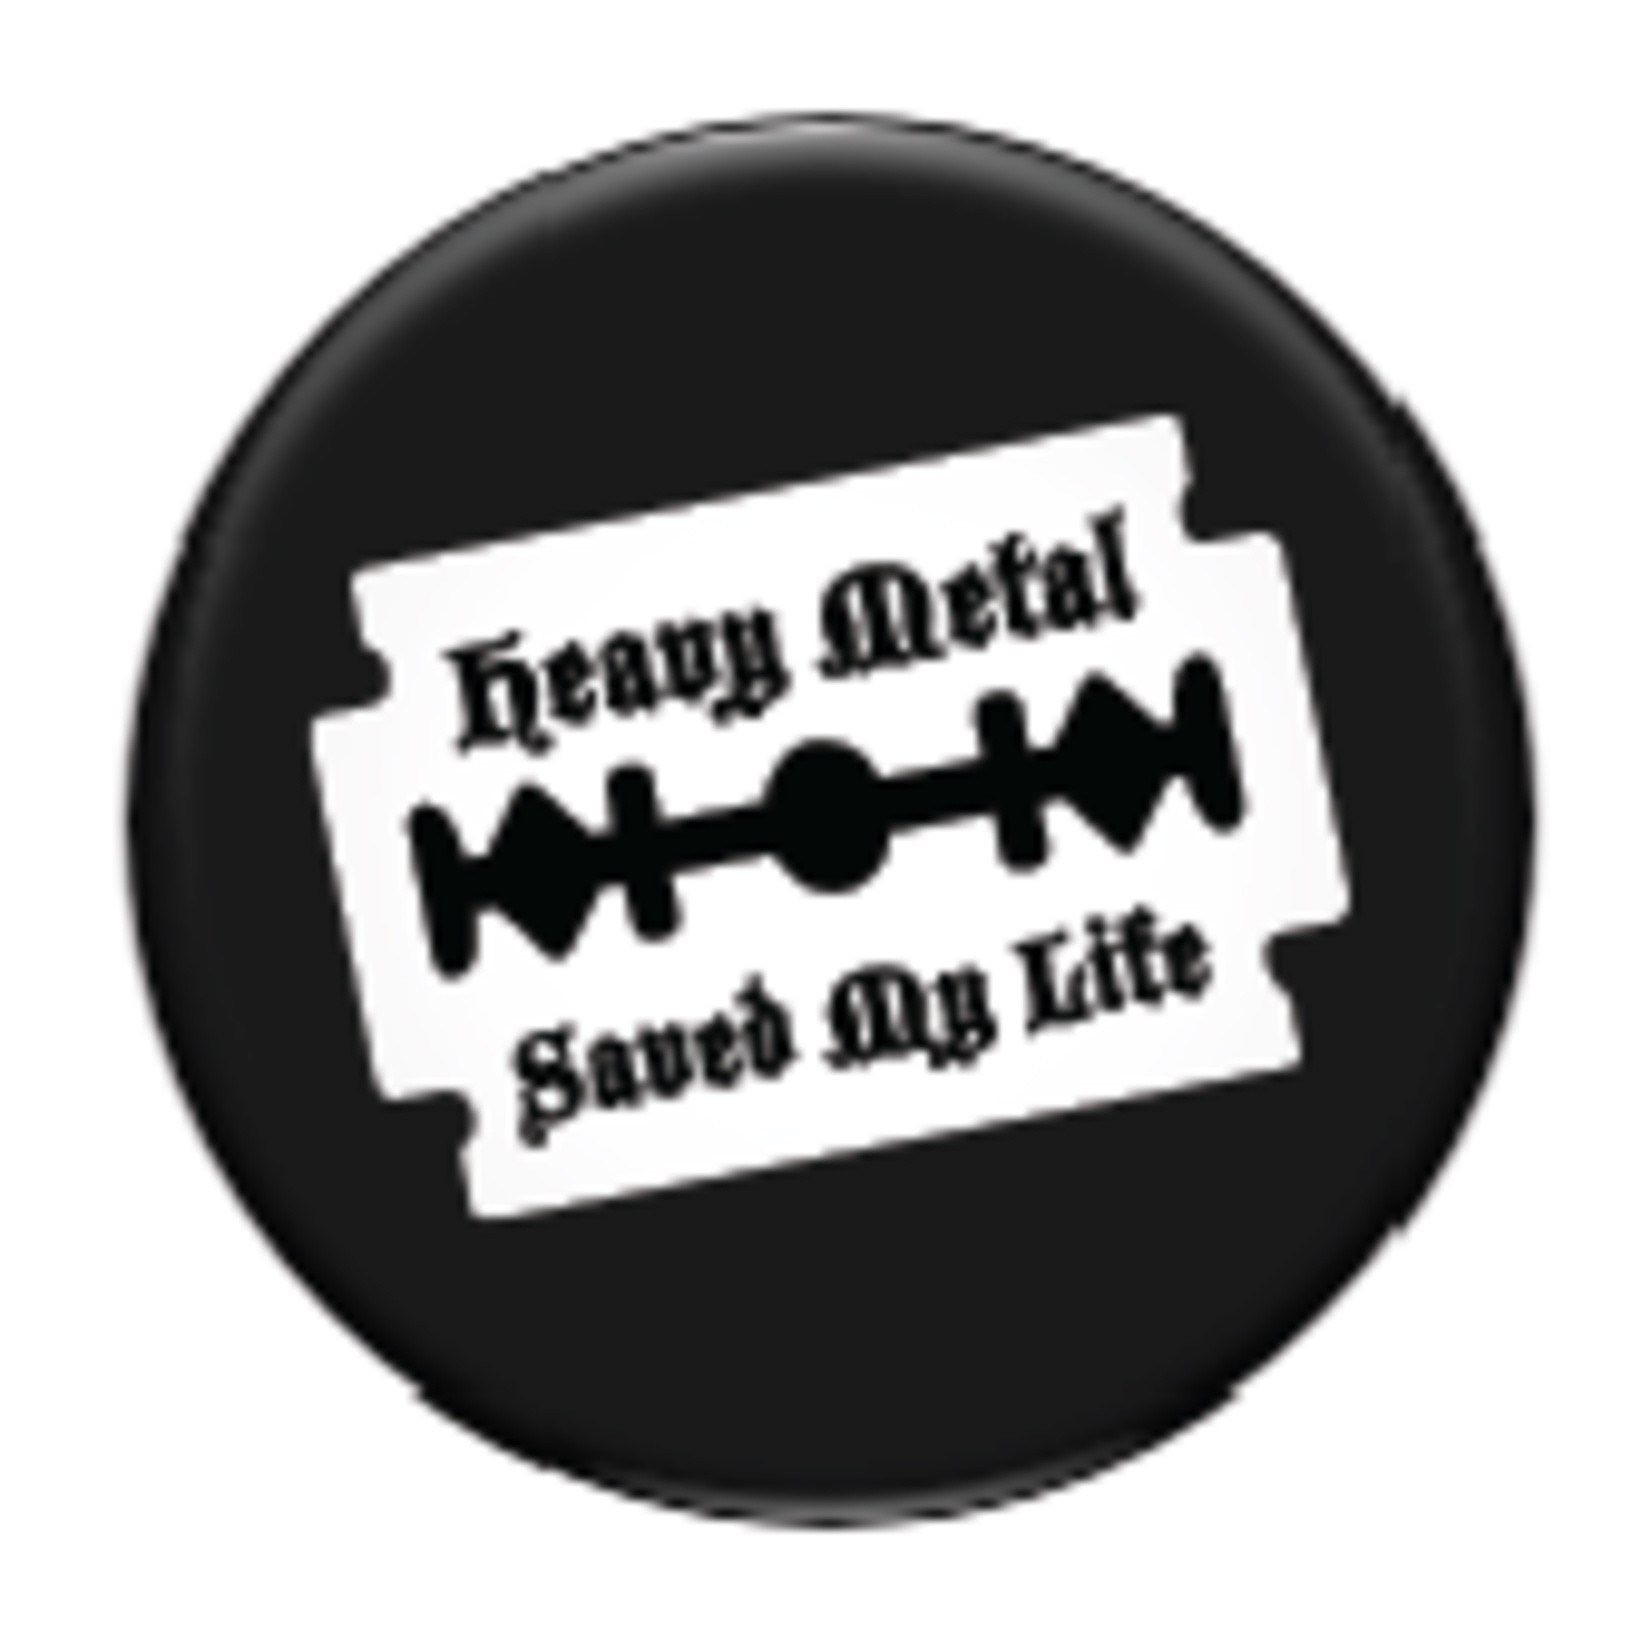 Button - Heavy Metal Saved My Life